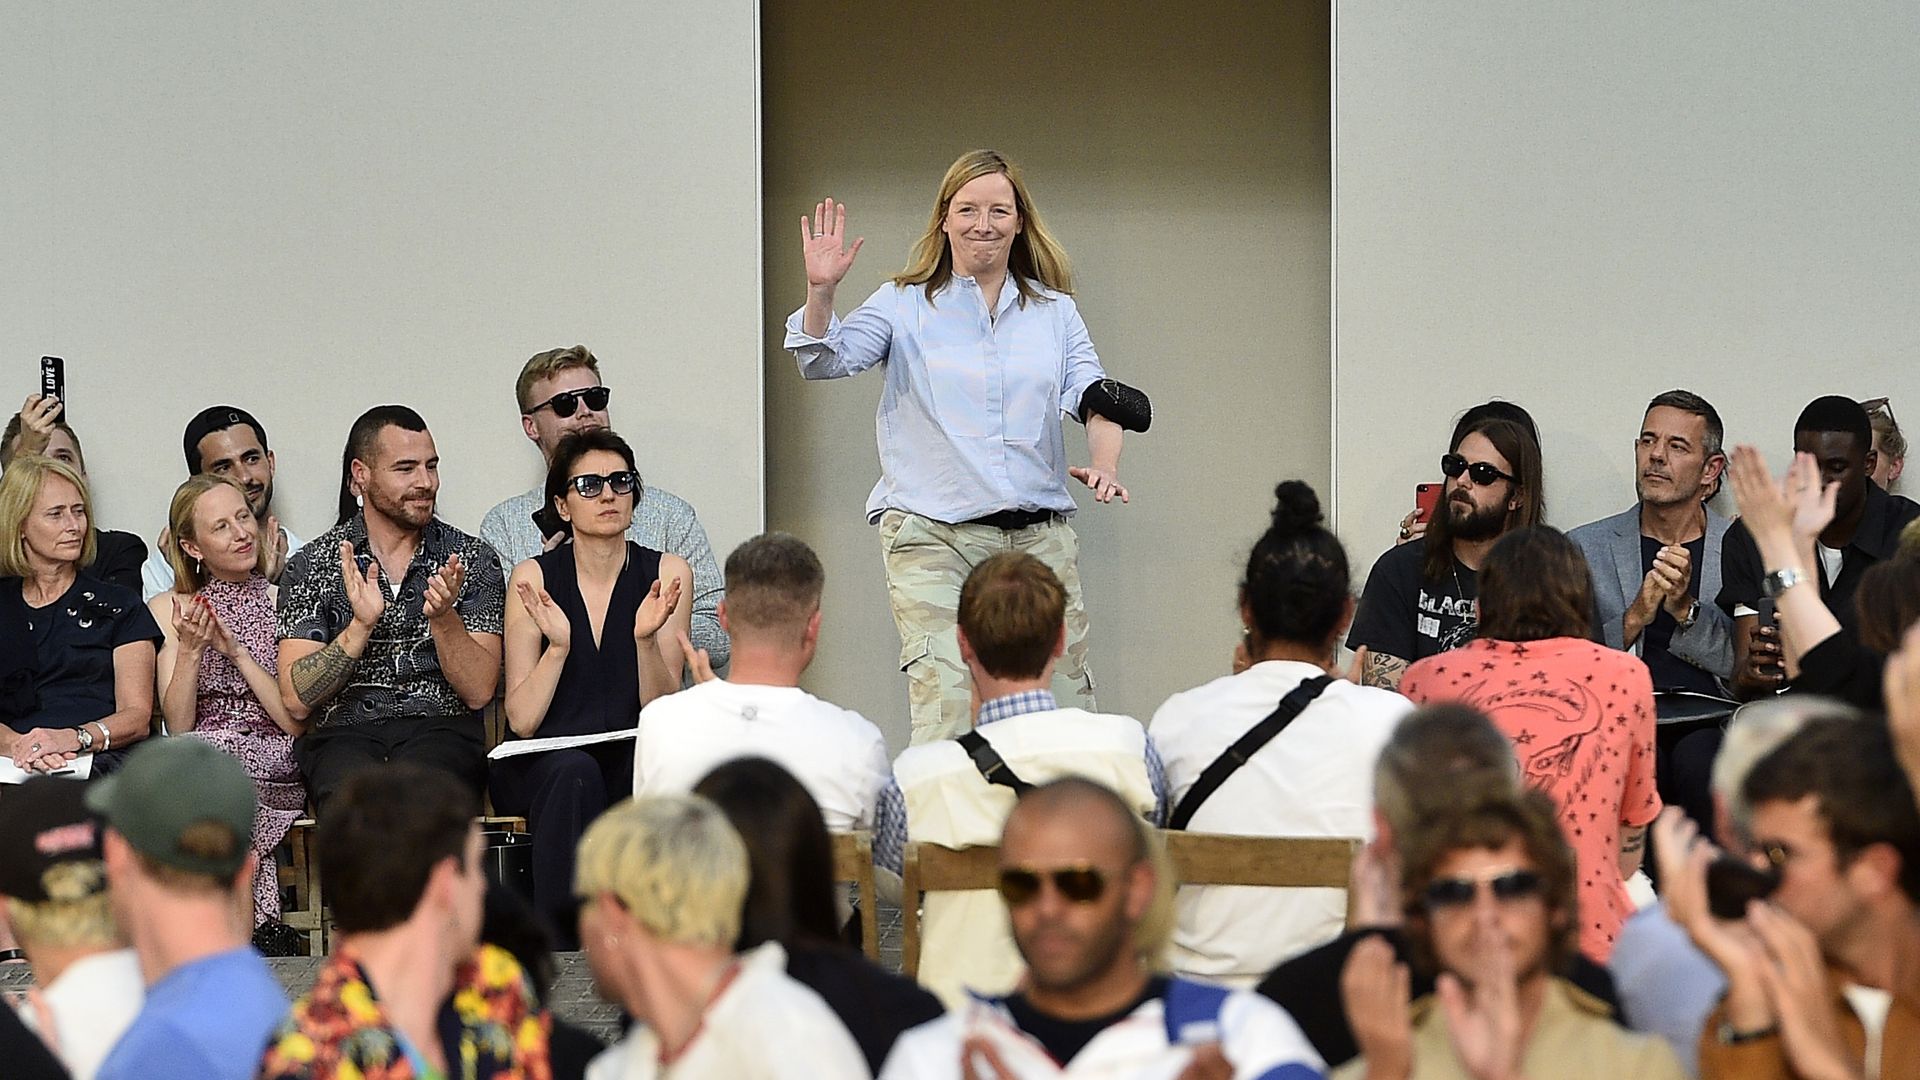 PARIS, FRANCE - JUNE 22:  Designer Sarah Burton acknowledges the audience during the Alexander McQueen Menswear Spring/Summer 2019 show as part of Paris Fashion Week on June 22, 2018 in Paris, France.  (Photo by Kristy Sparow/Getty Images)